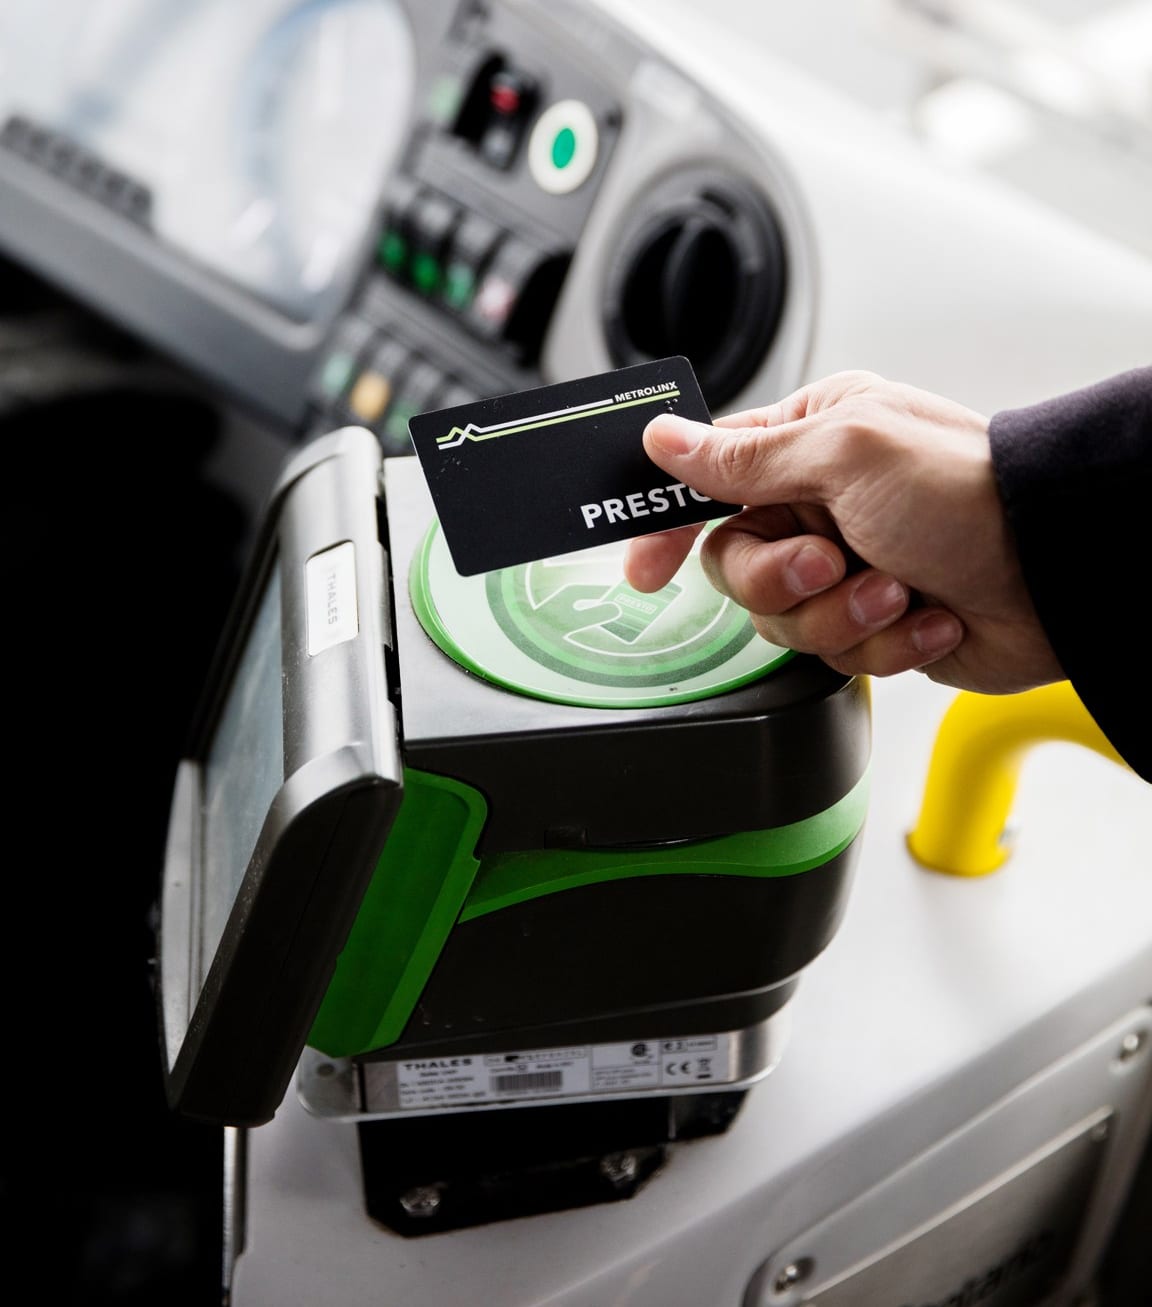 a person's hand tapping their PRESTO card on a PRESTO device.